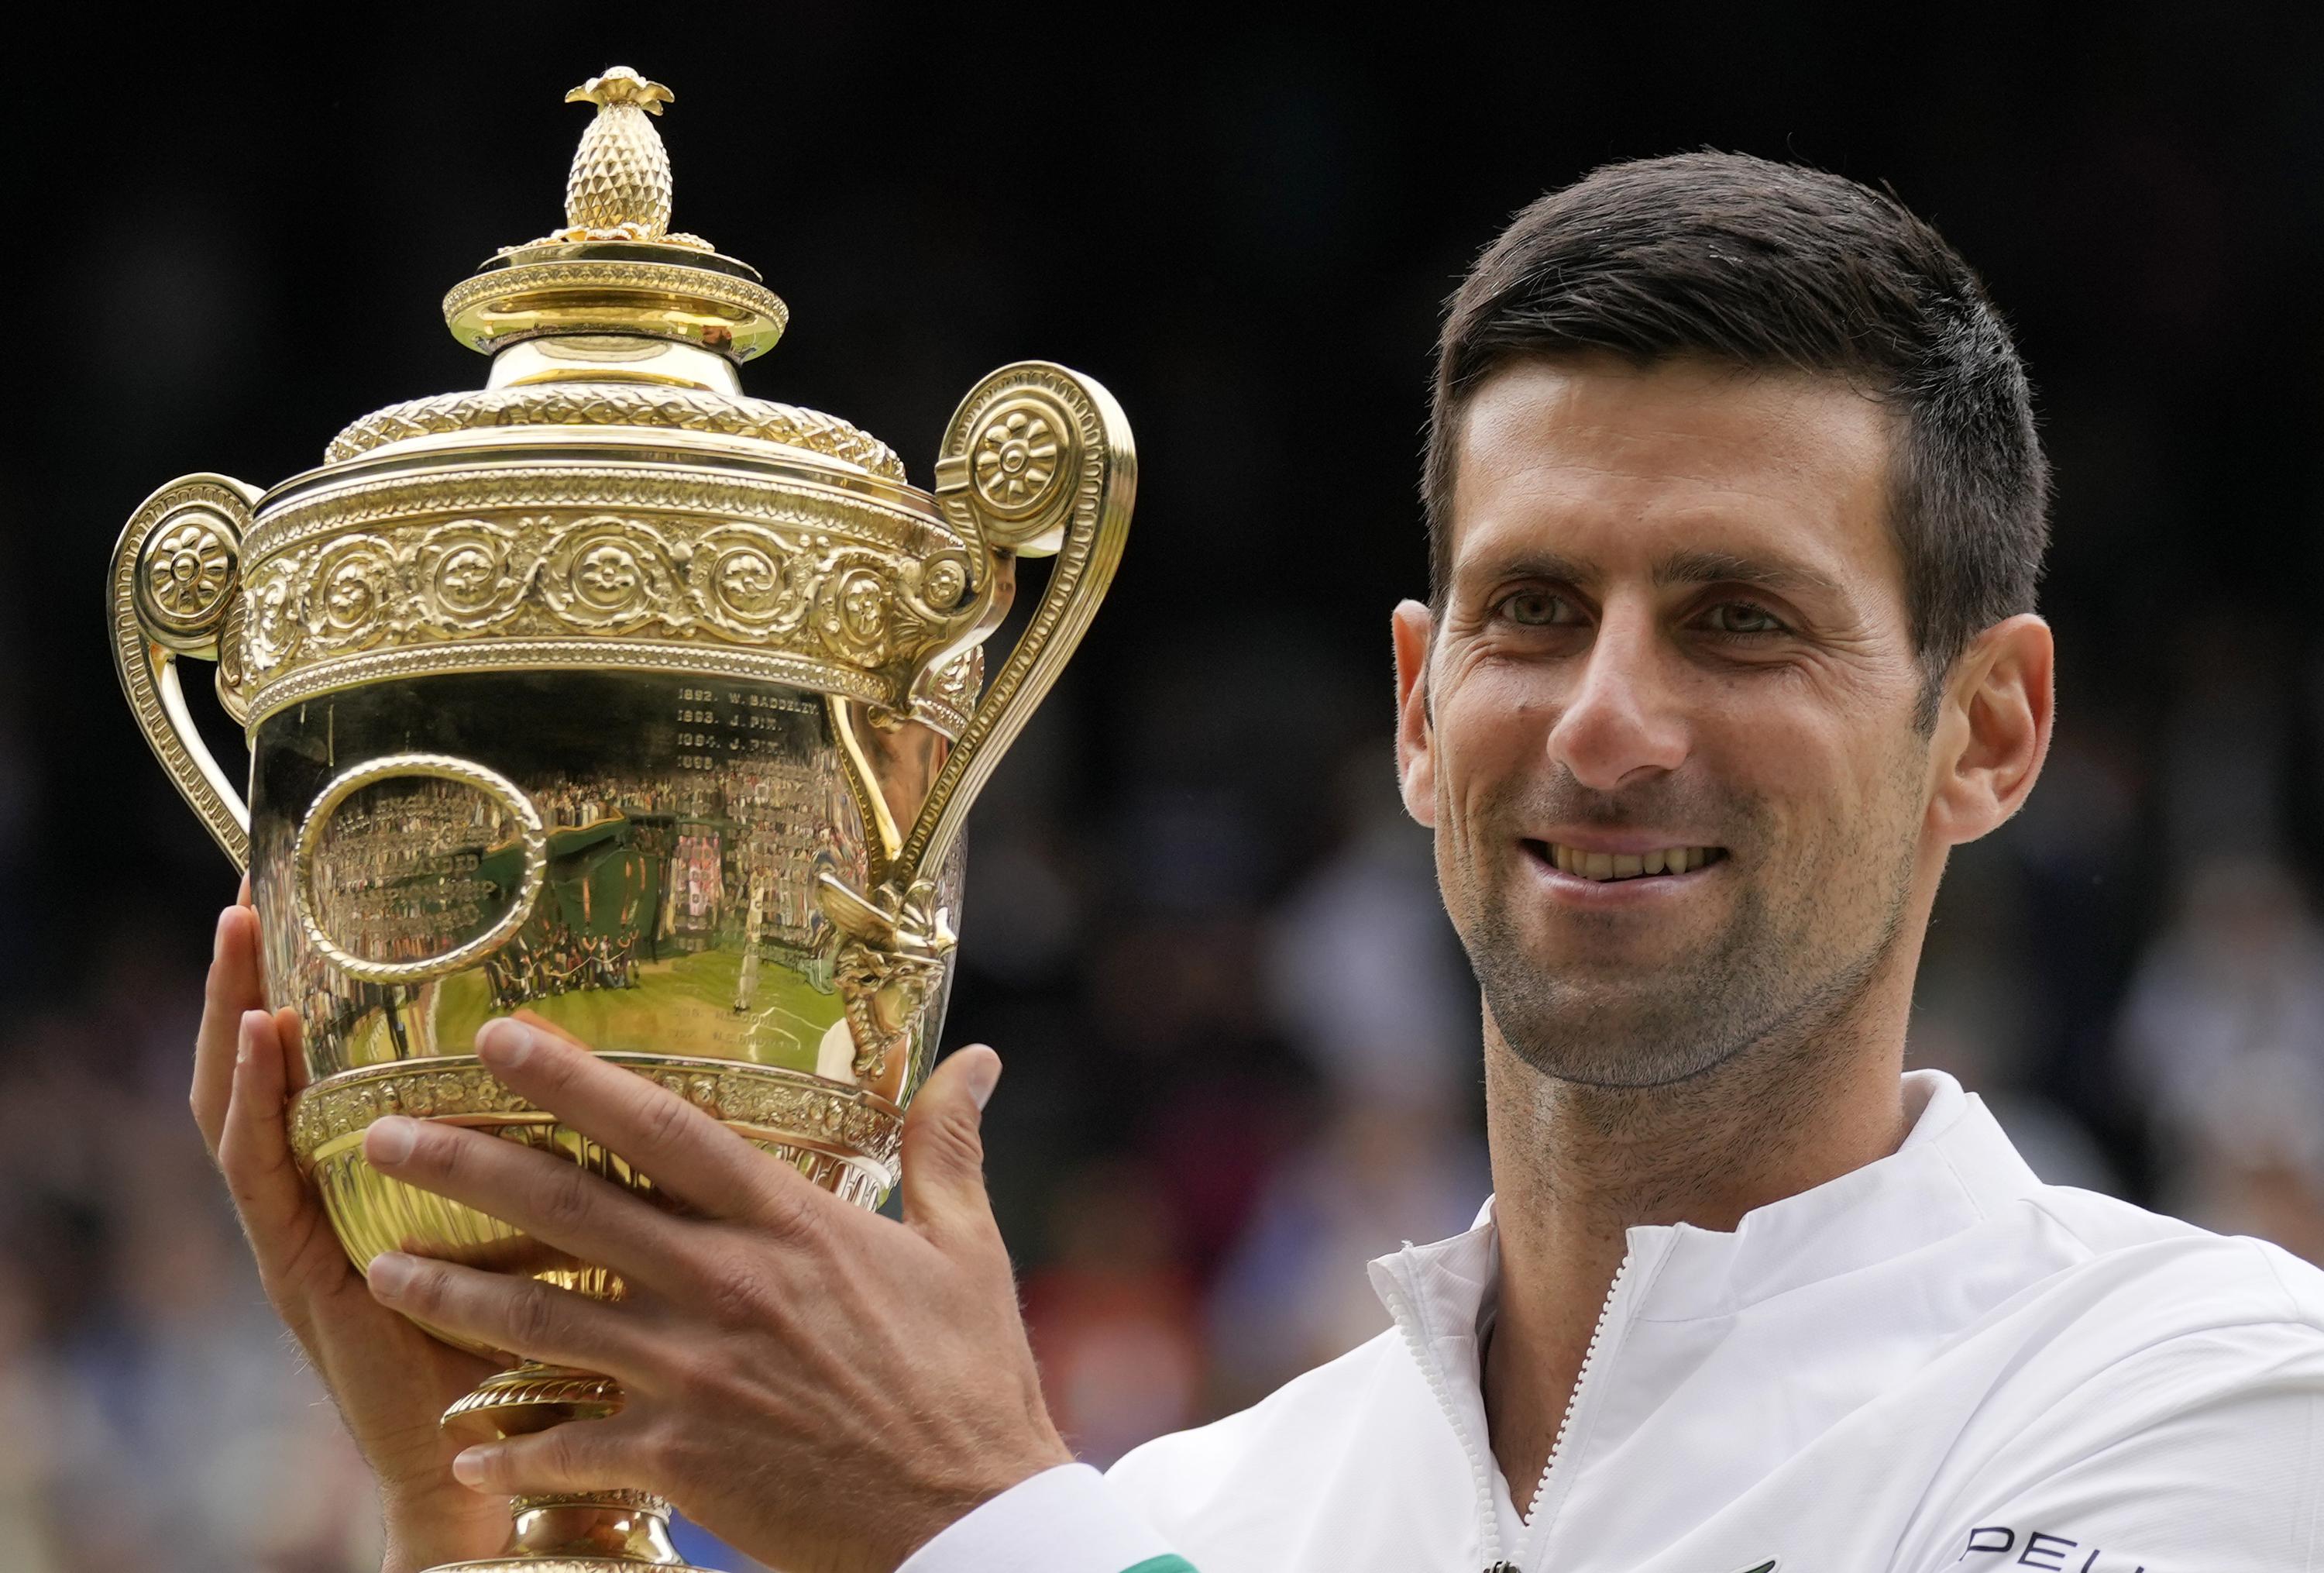 Djokovic can play at Wimbledon; no vaccination required